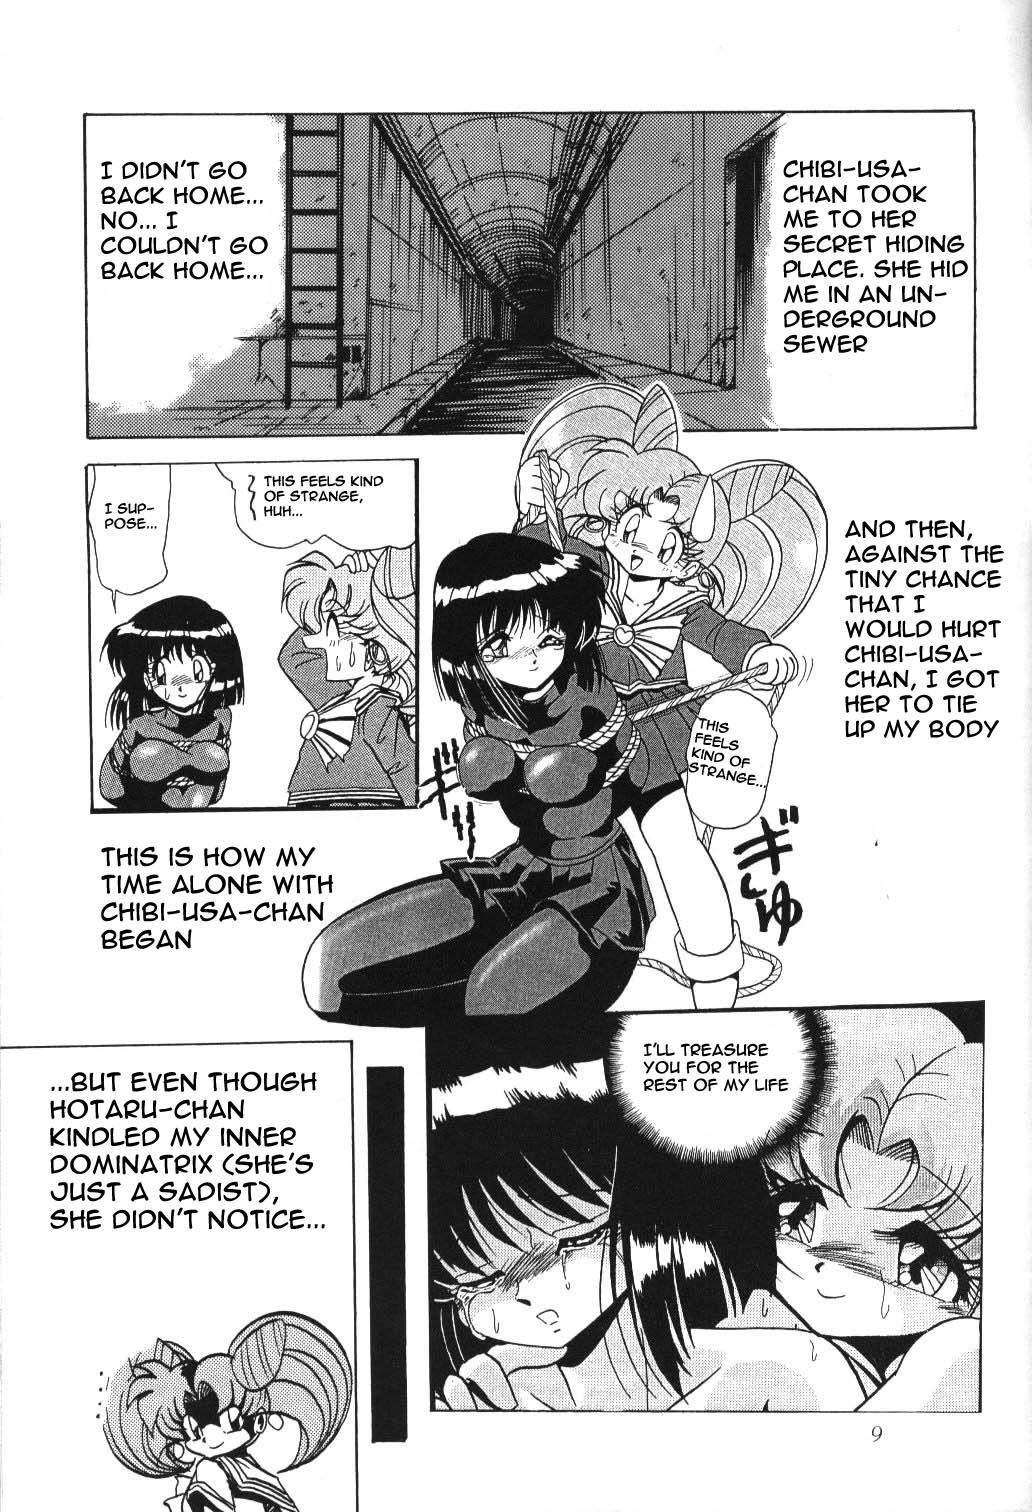 Group Sex Silent Saturn 2 - Sailor moon Groping - Page 7